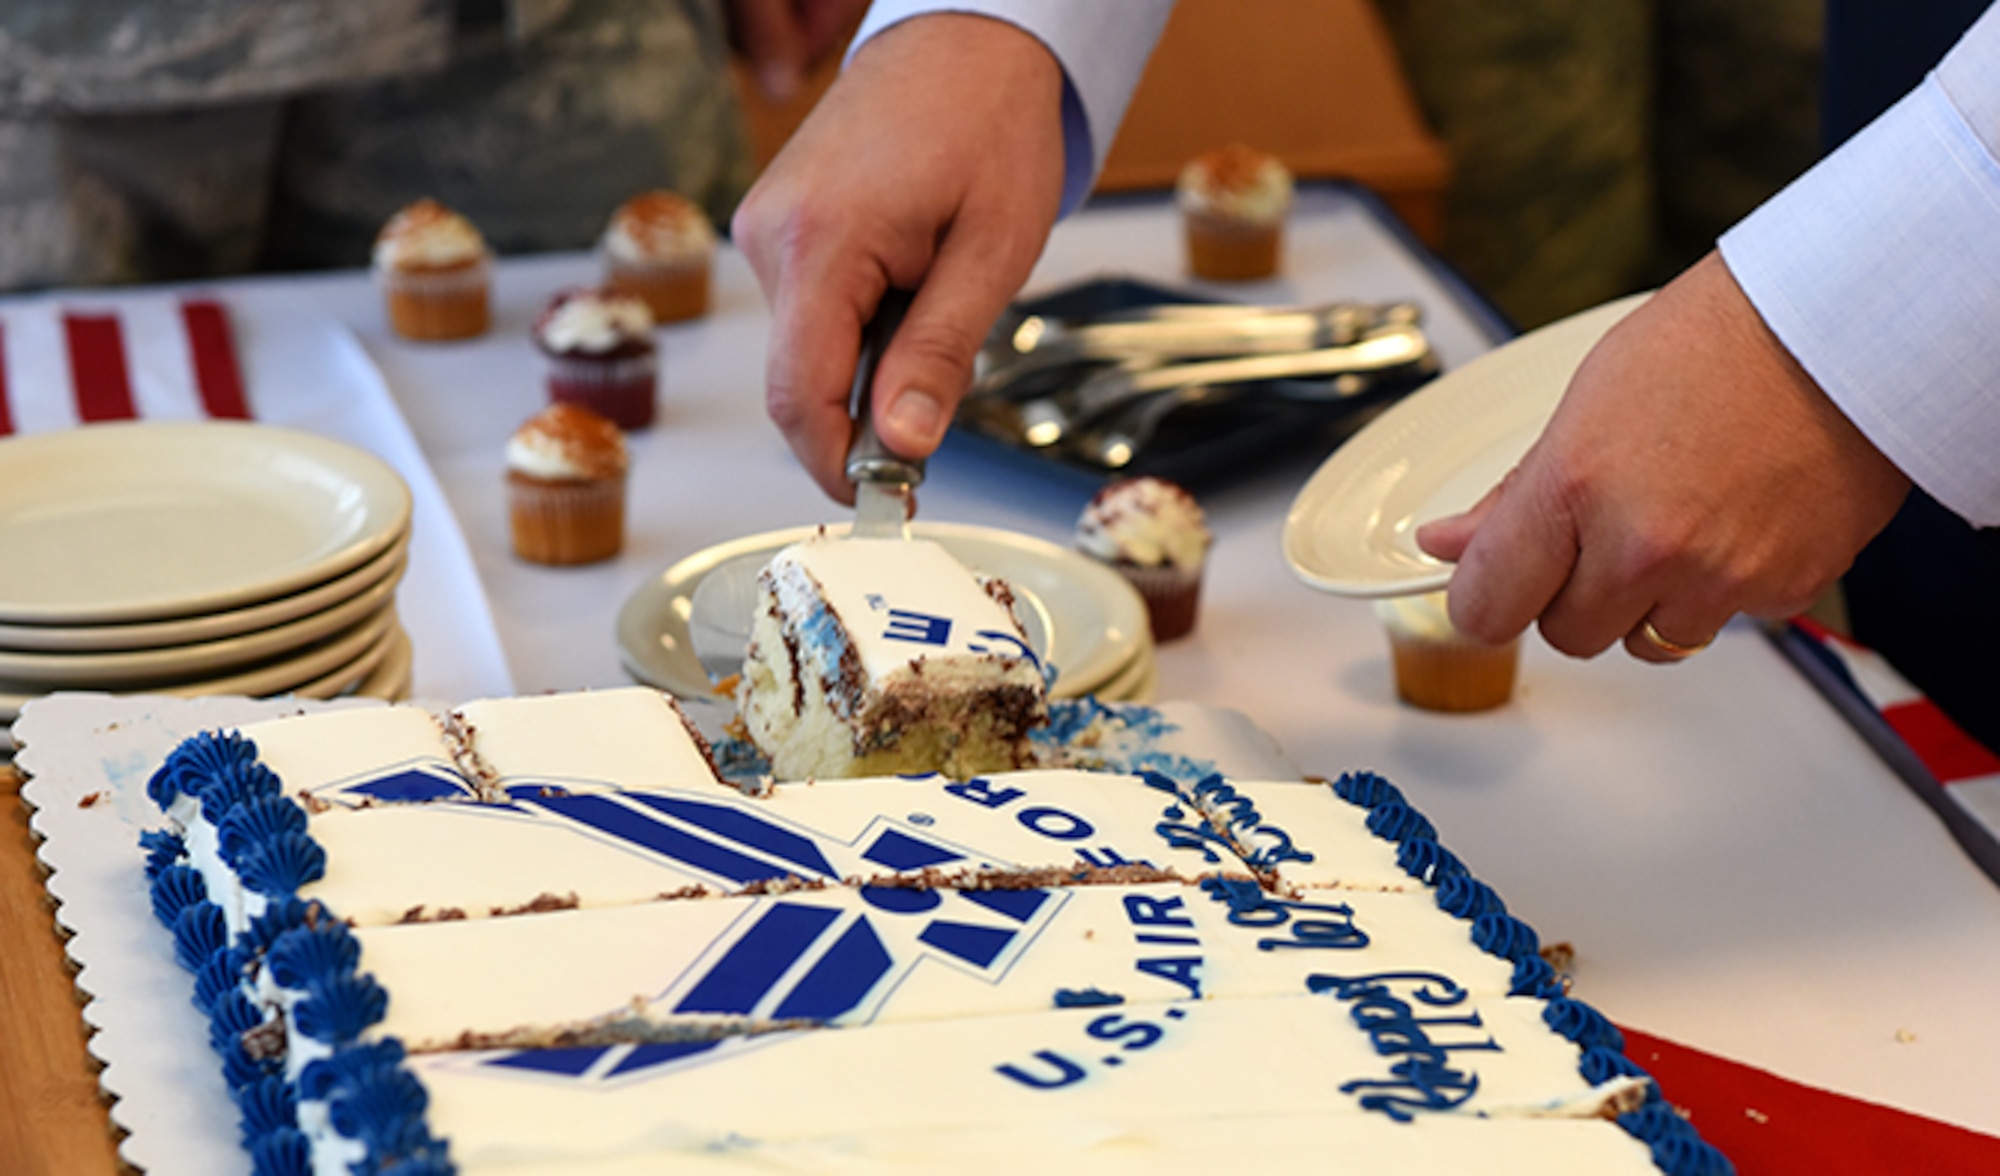 Col. Matthew Fritz, 92nd Air Refueling Wing vice commander, serves up slices of birthday cake at a United States Air Force birthday ceremony Sept. 13, at Fairchild Air Force Base. The base spent the week recognizing the USAF's birthday with several ceremonies. (U.S. Air Force photo/Airman 1st Class Ryan Lackey)